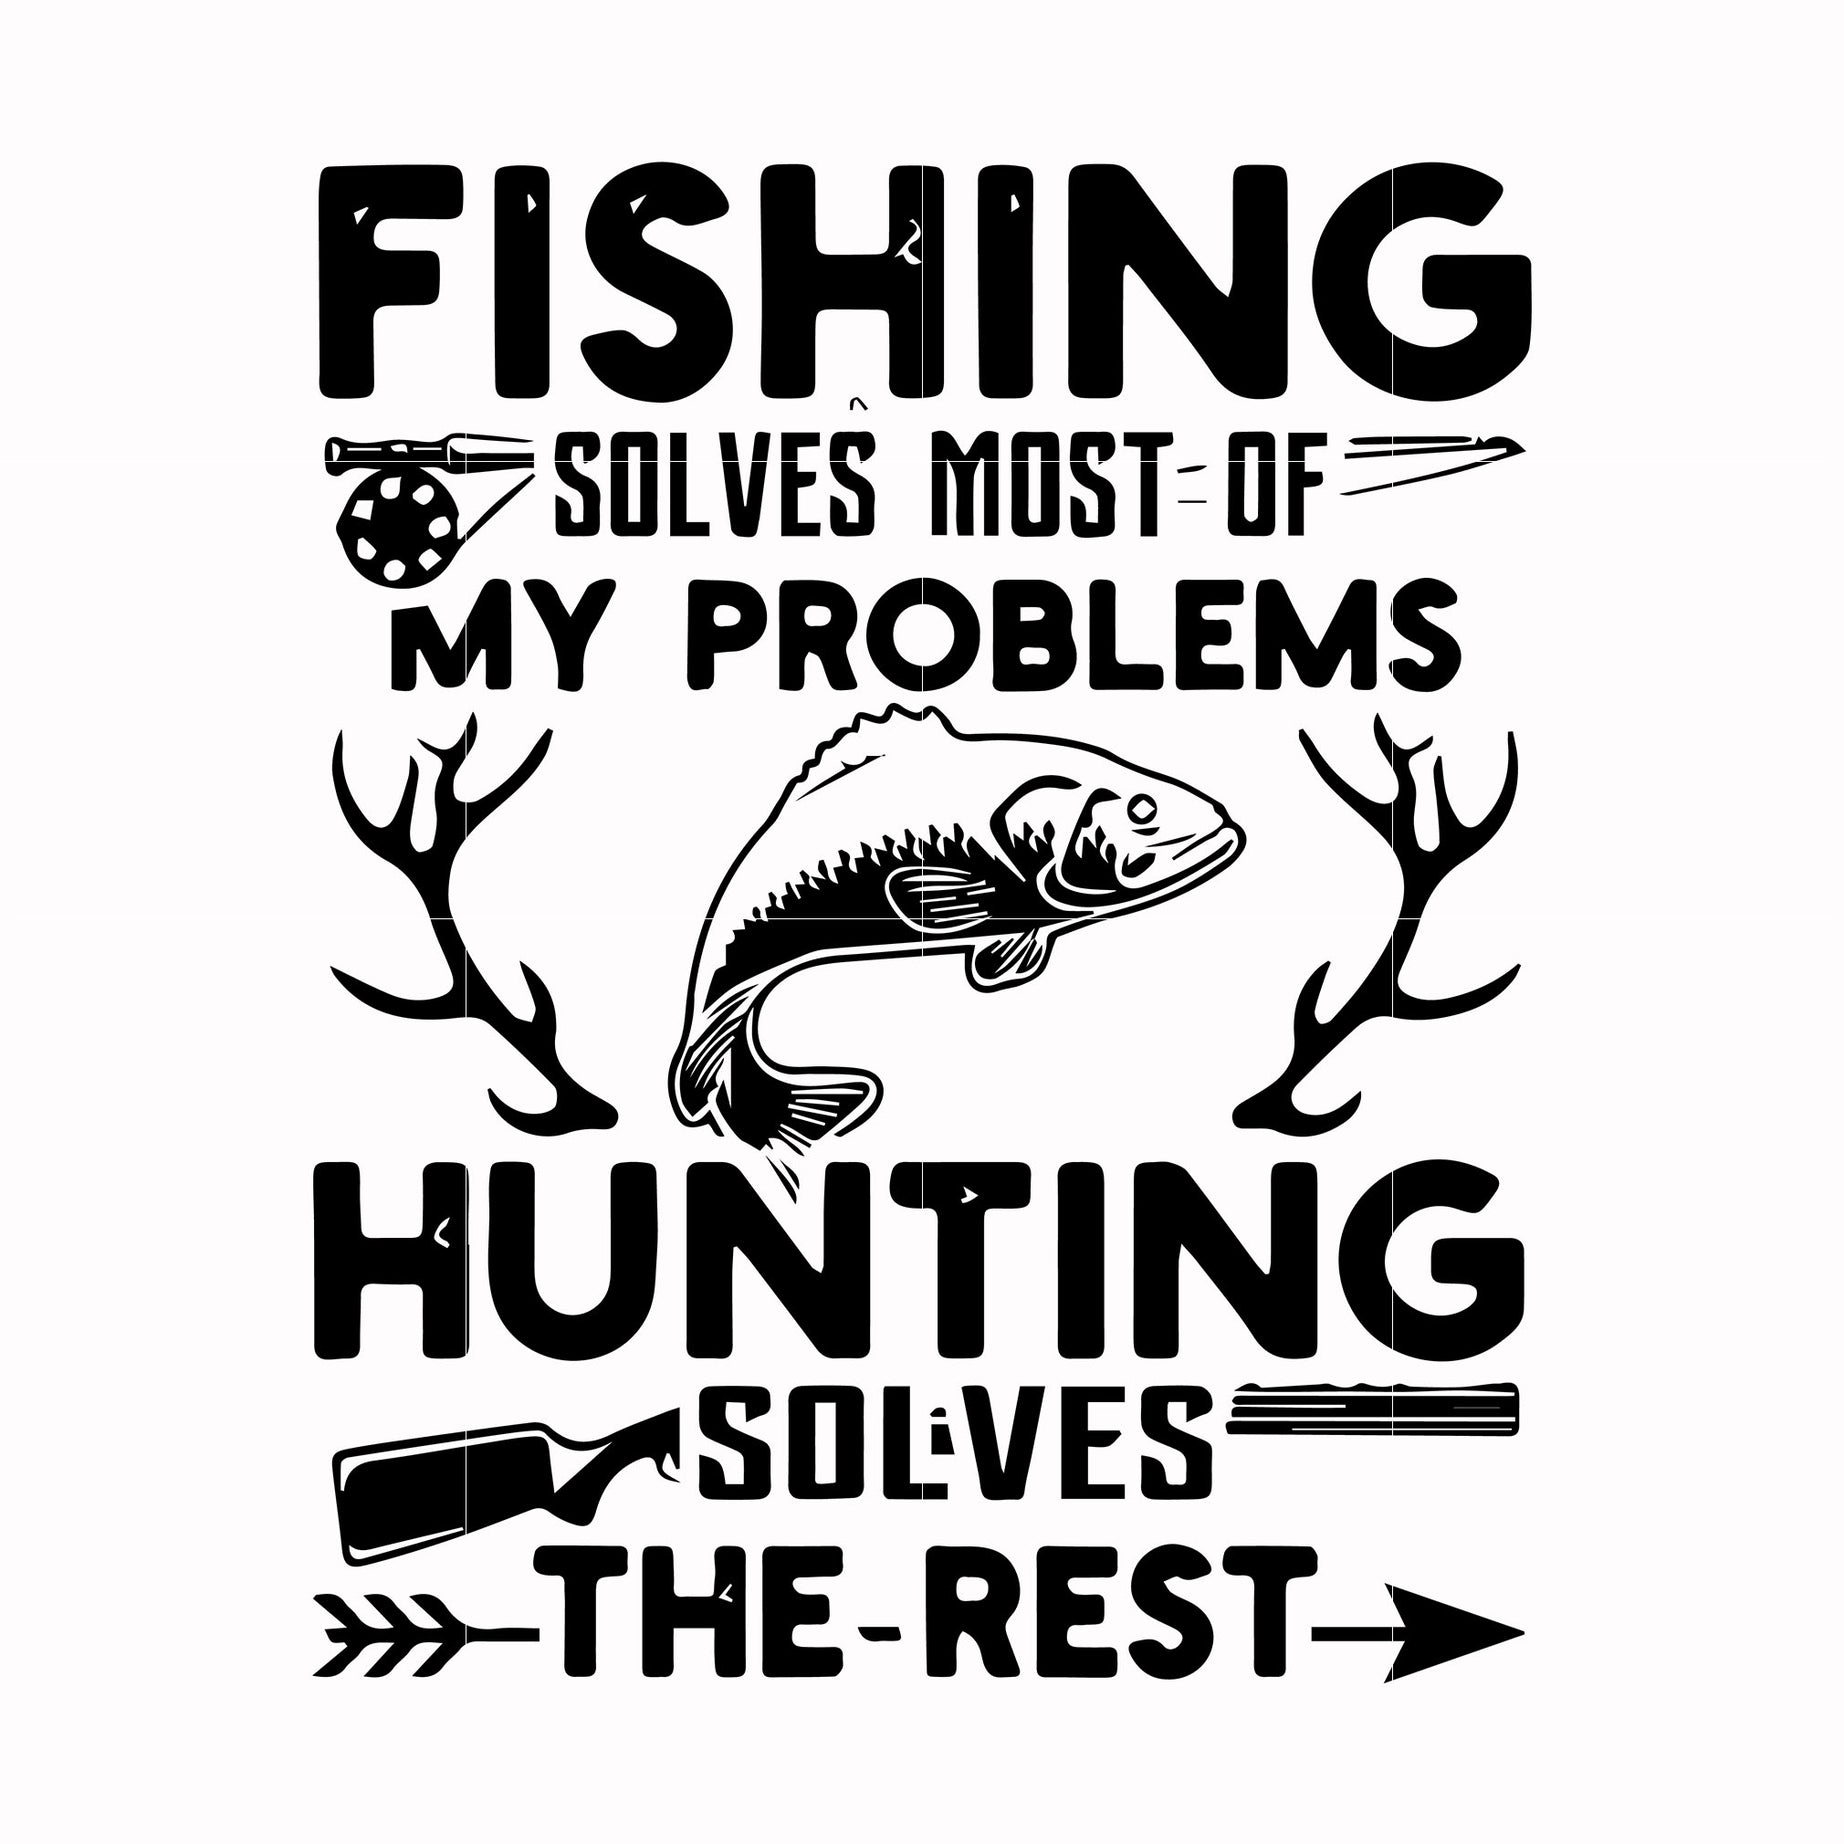 Fishing solves most of my problems hunting solves the rest svg, png, dxf, eps digital file OTH0052